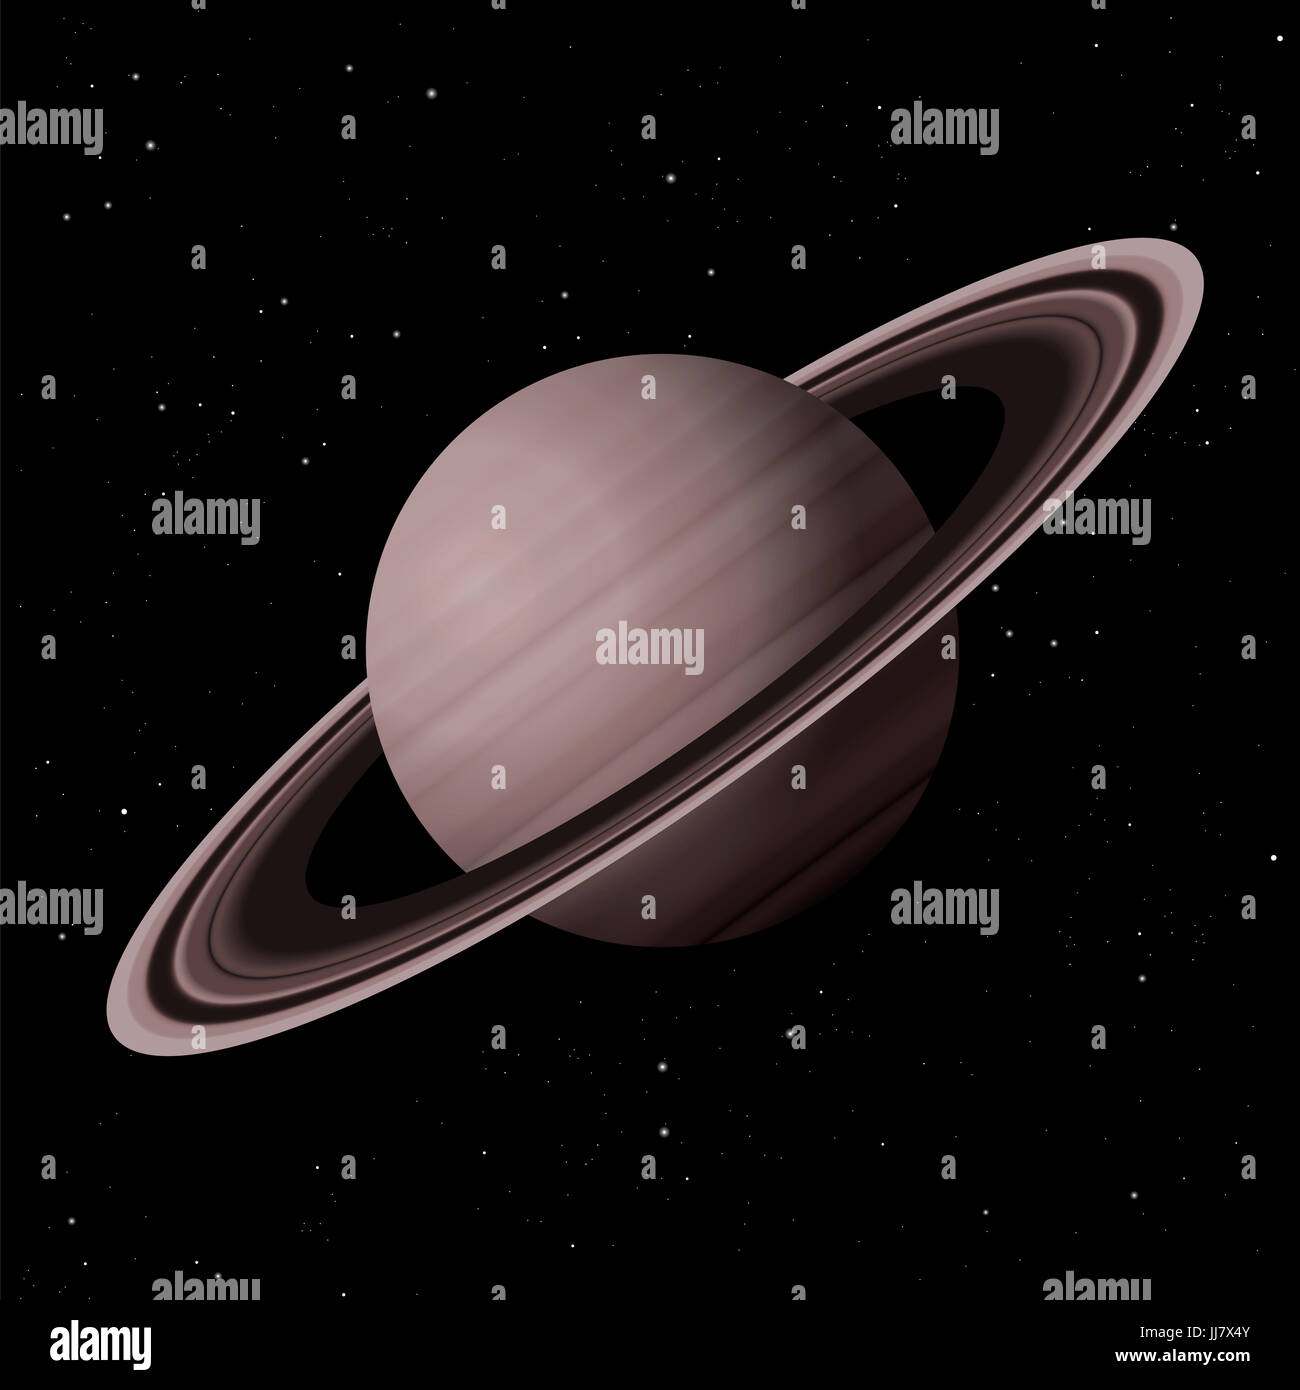 Saturn with typical rings - second largest planet in the Solar System - illustration on starry night galaxy black background. Stock Photo